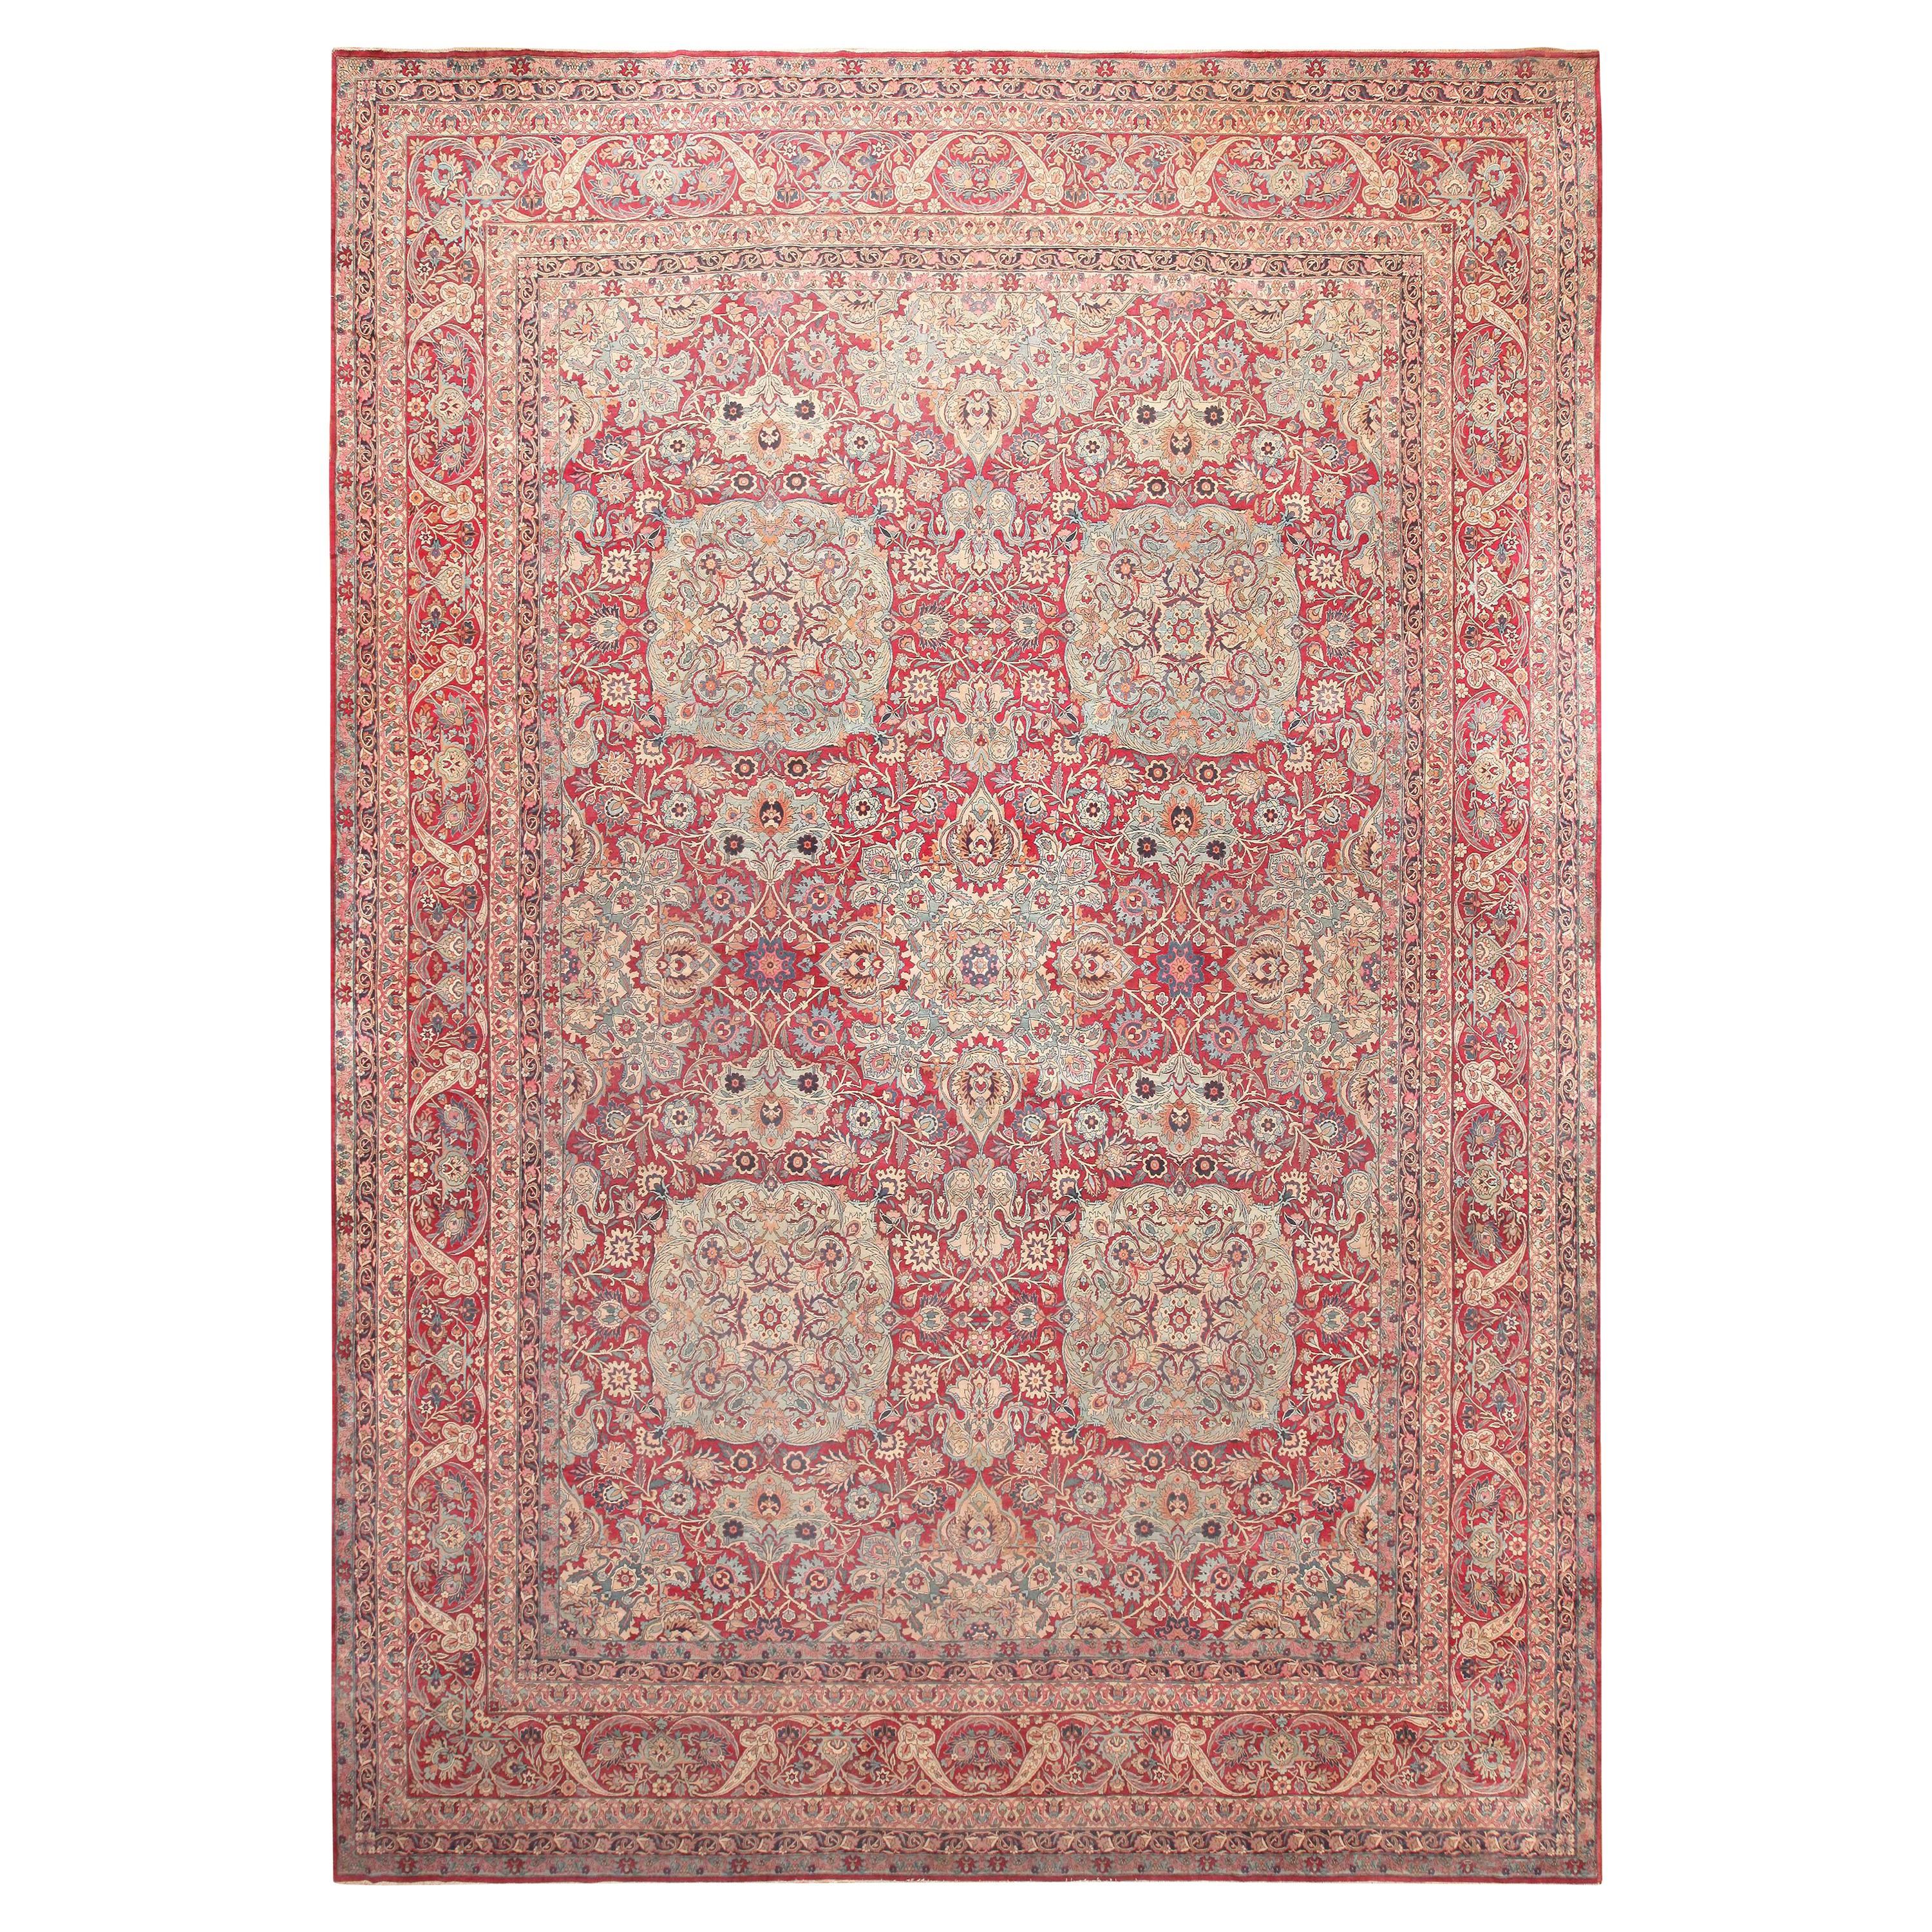 Floral Large Antique Persian Kerman Rug. Size: 14 ft 2 in x 19 ft 8 in